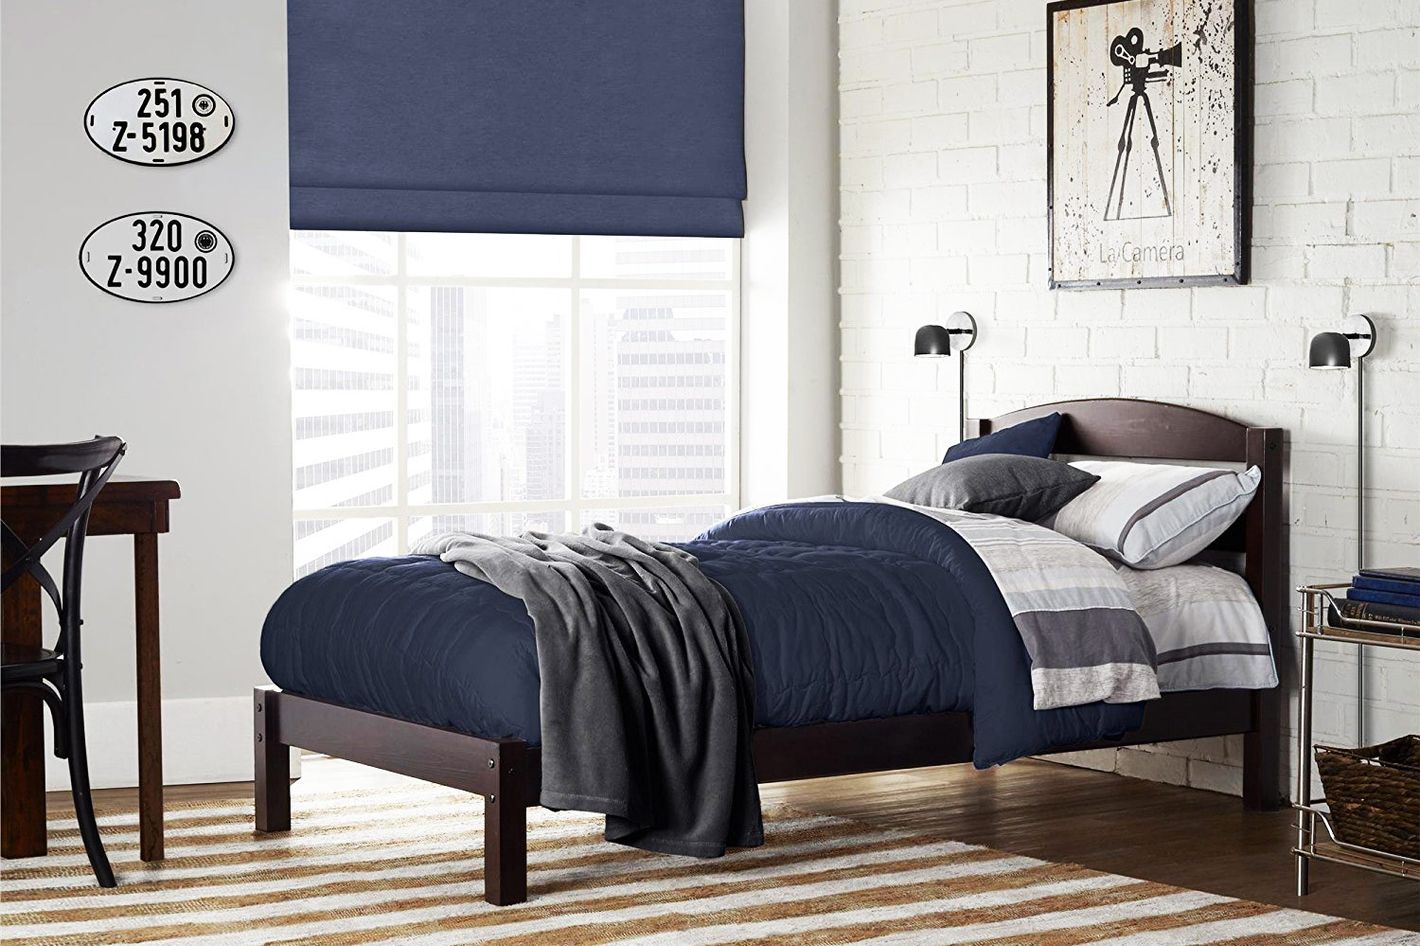 12 Best Twin Beds For Kids 2019, Twin Bed Frame Height